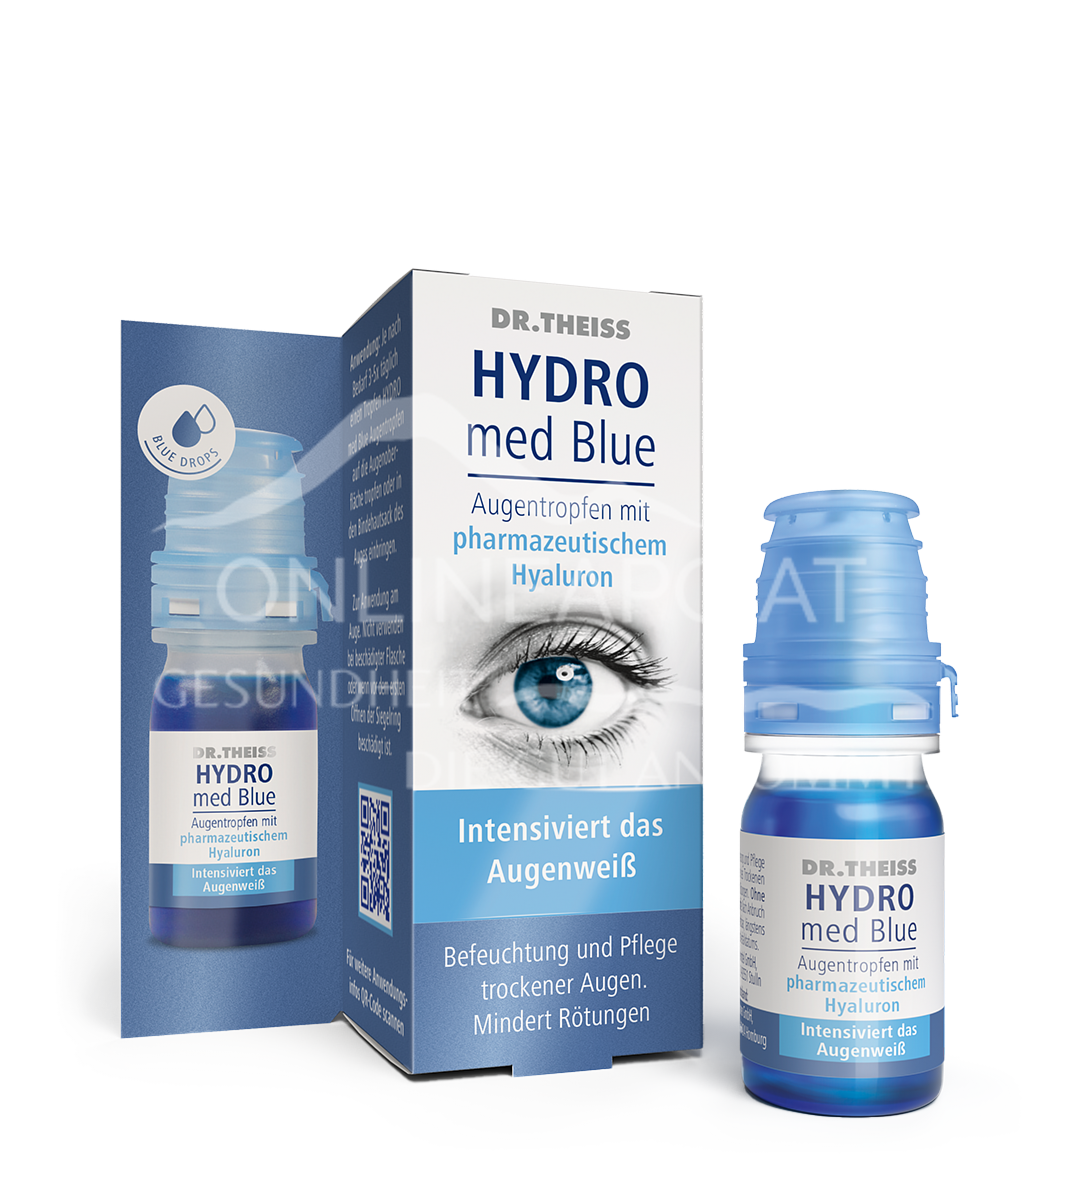 DR. THEISS HYDRO med Blue Augentropfen Multidose